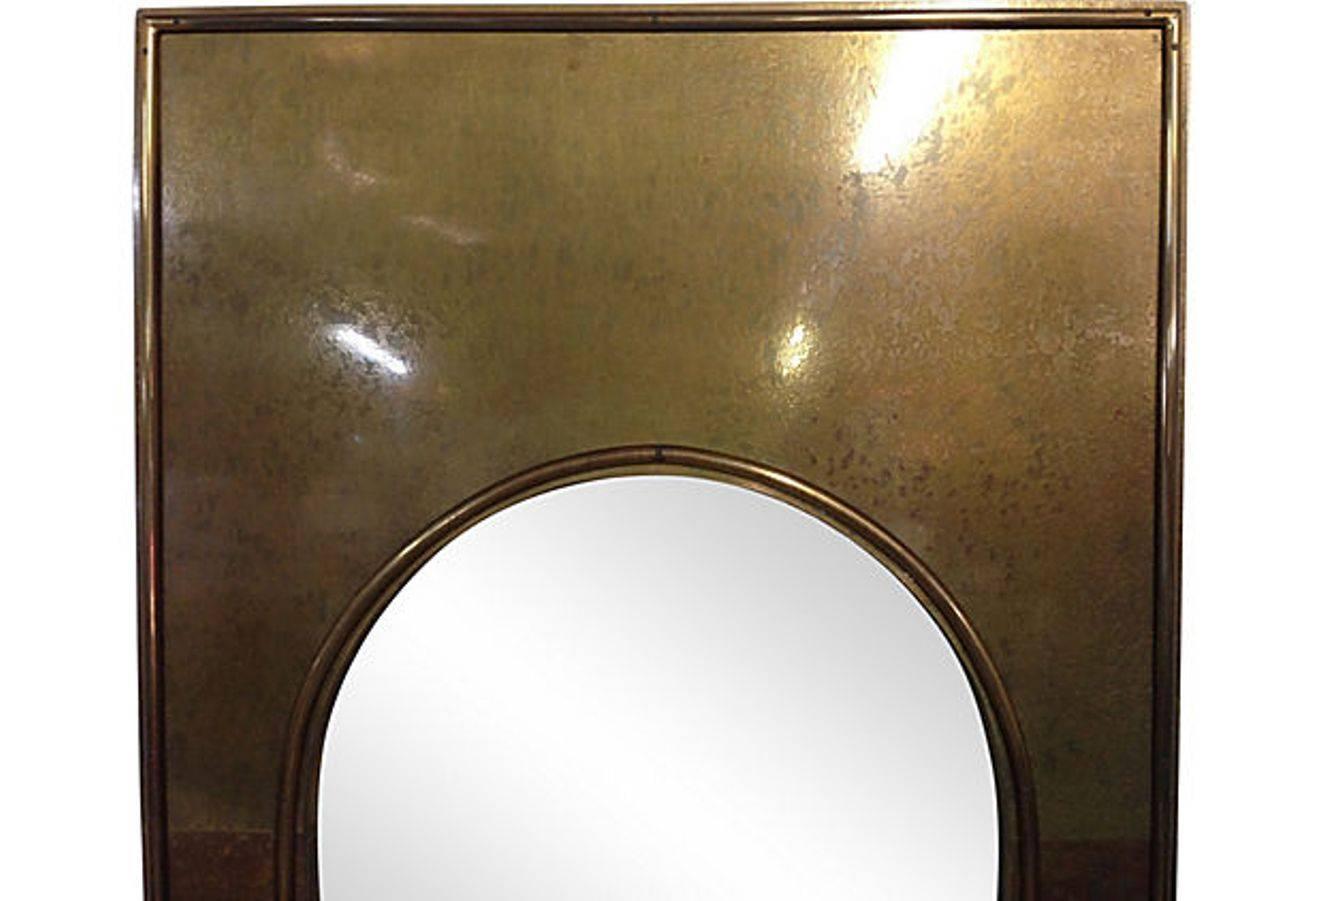 Solid brass full length mirror with Moorish style arch by Mastercraft. This framed brass clad mirror is heavy and substantial with an intentional patina.